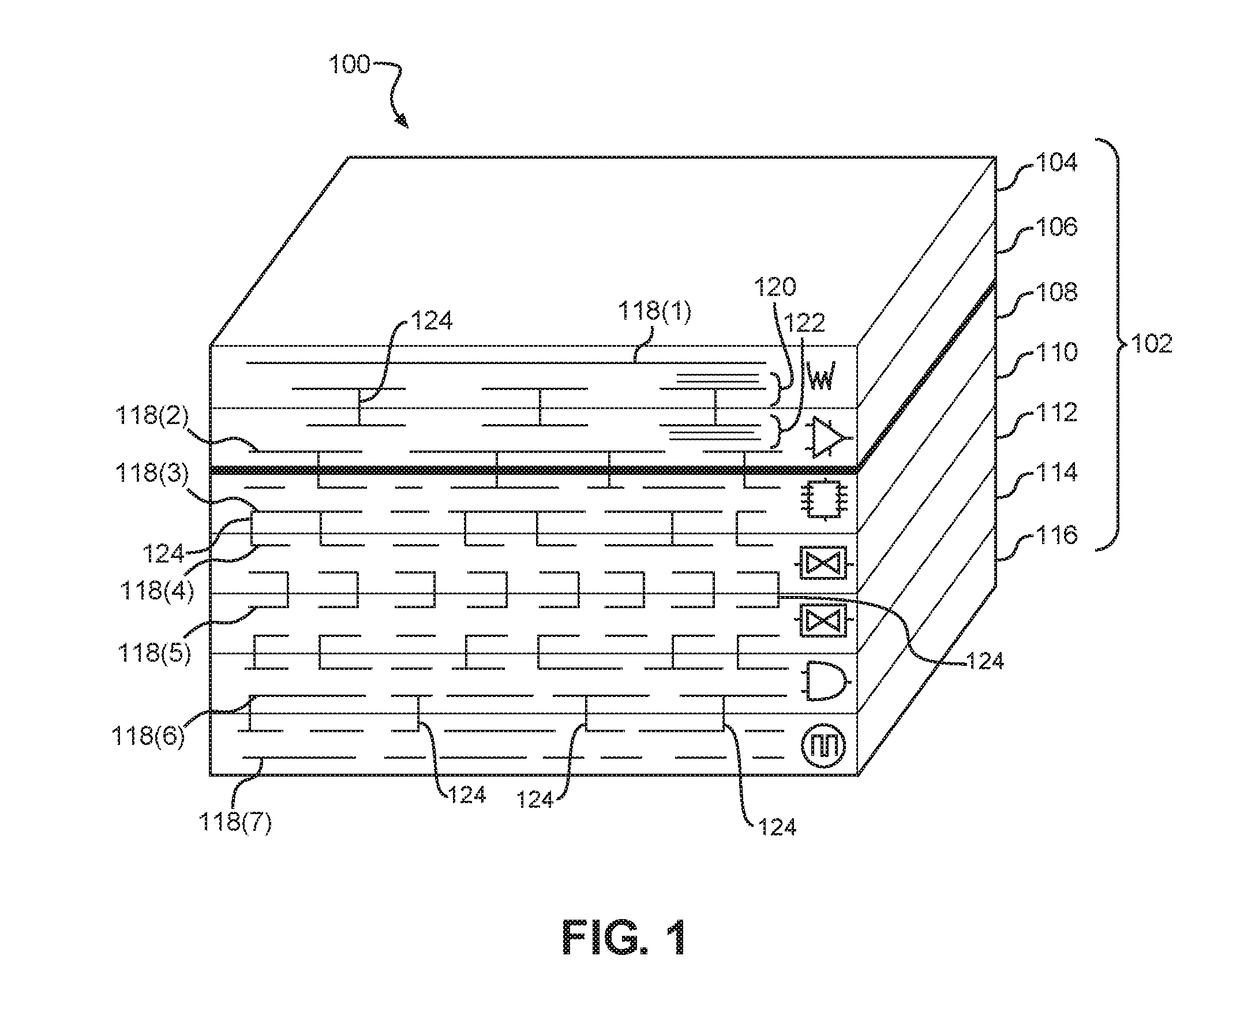 Power distribution networks for a three-dimensional (3D) integrated circuit (IC) (3DIC)